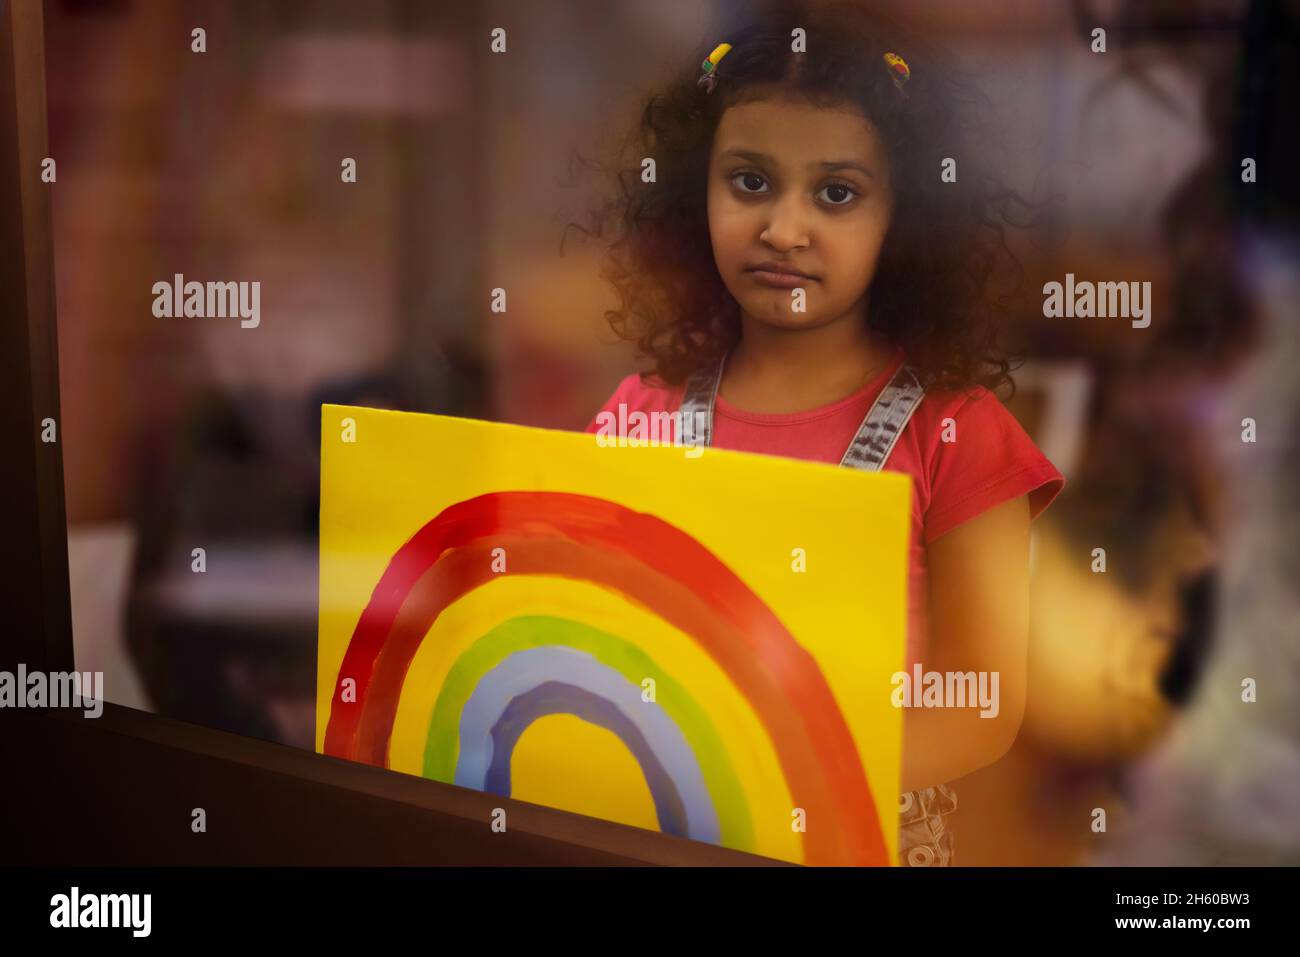 A girl in sad mood showing a rainbow painting in front of camera Stock Photo